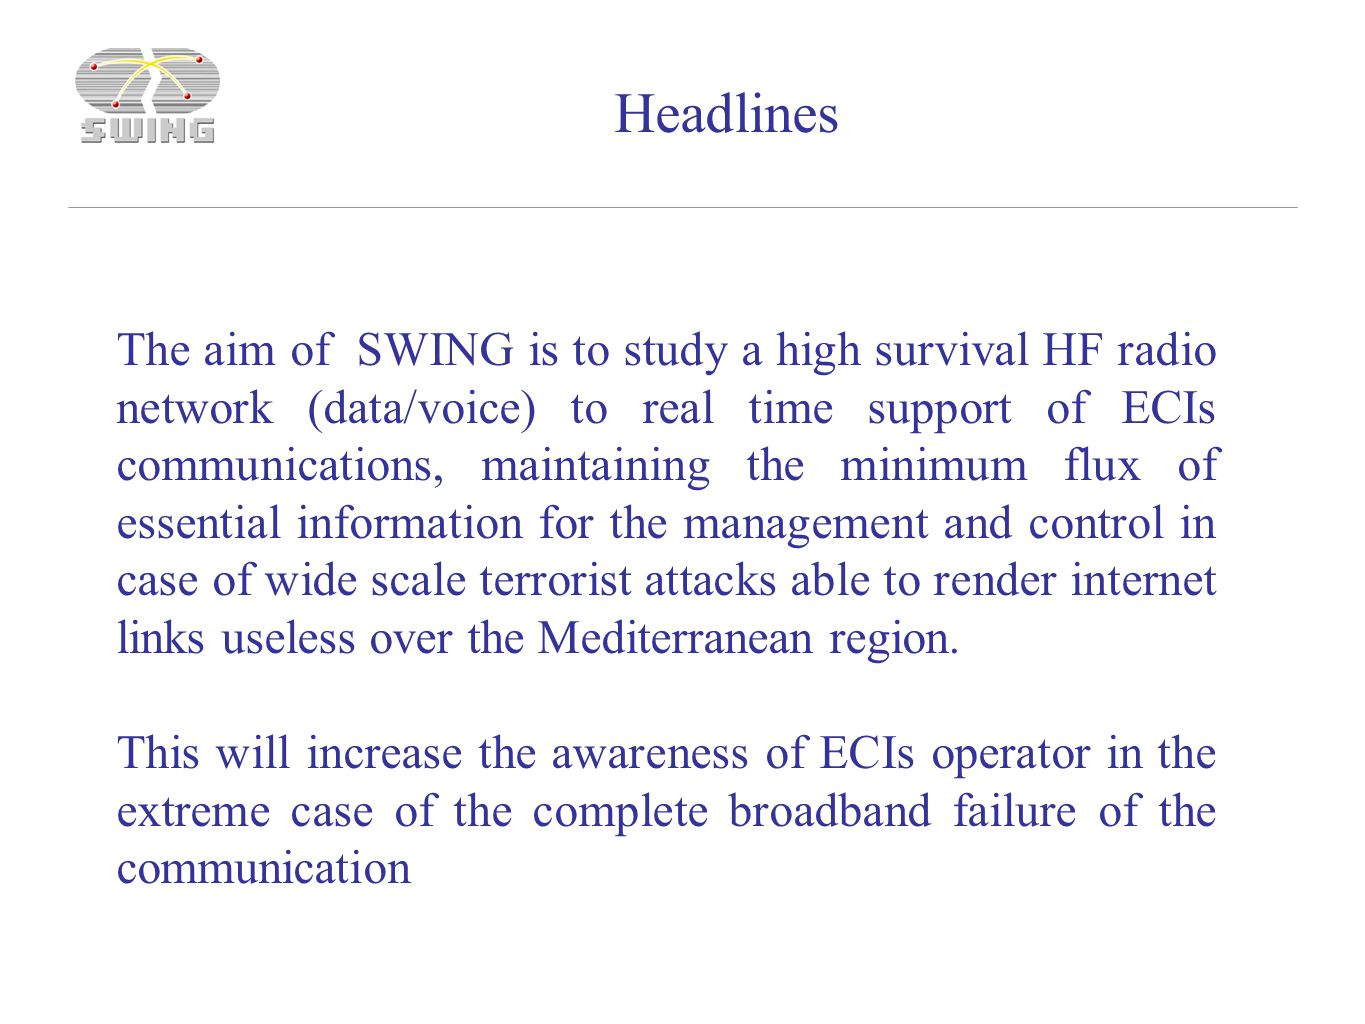 The aim of SWING is to study a high survival HF radio network (data/voice) to real time support of ECIs communications, maintaining the minimum flux of essential information for the management and control in case of wide scale terrorist attacks able to render internet links useless over the Mediterranean region.